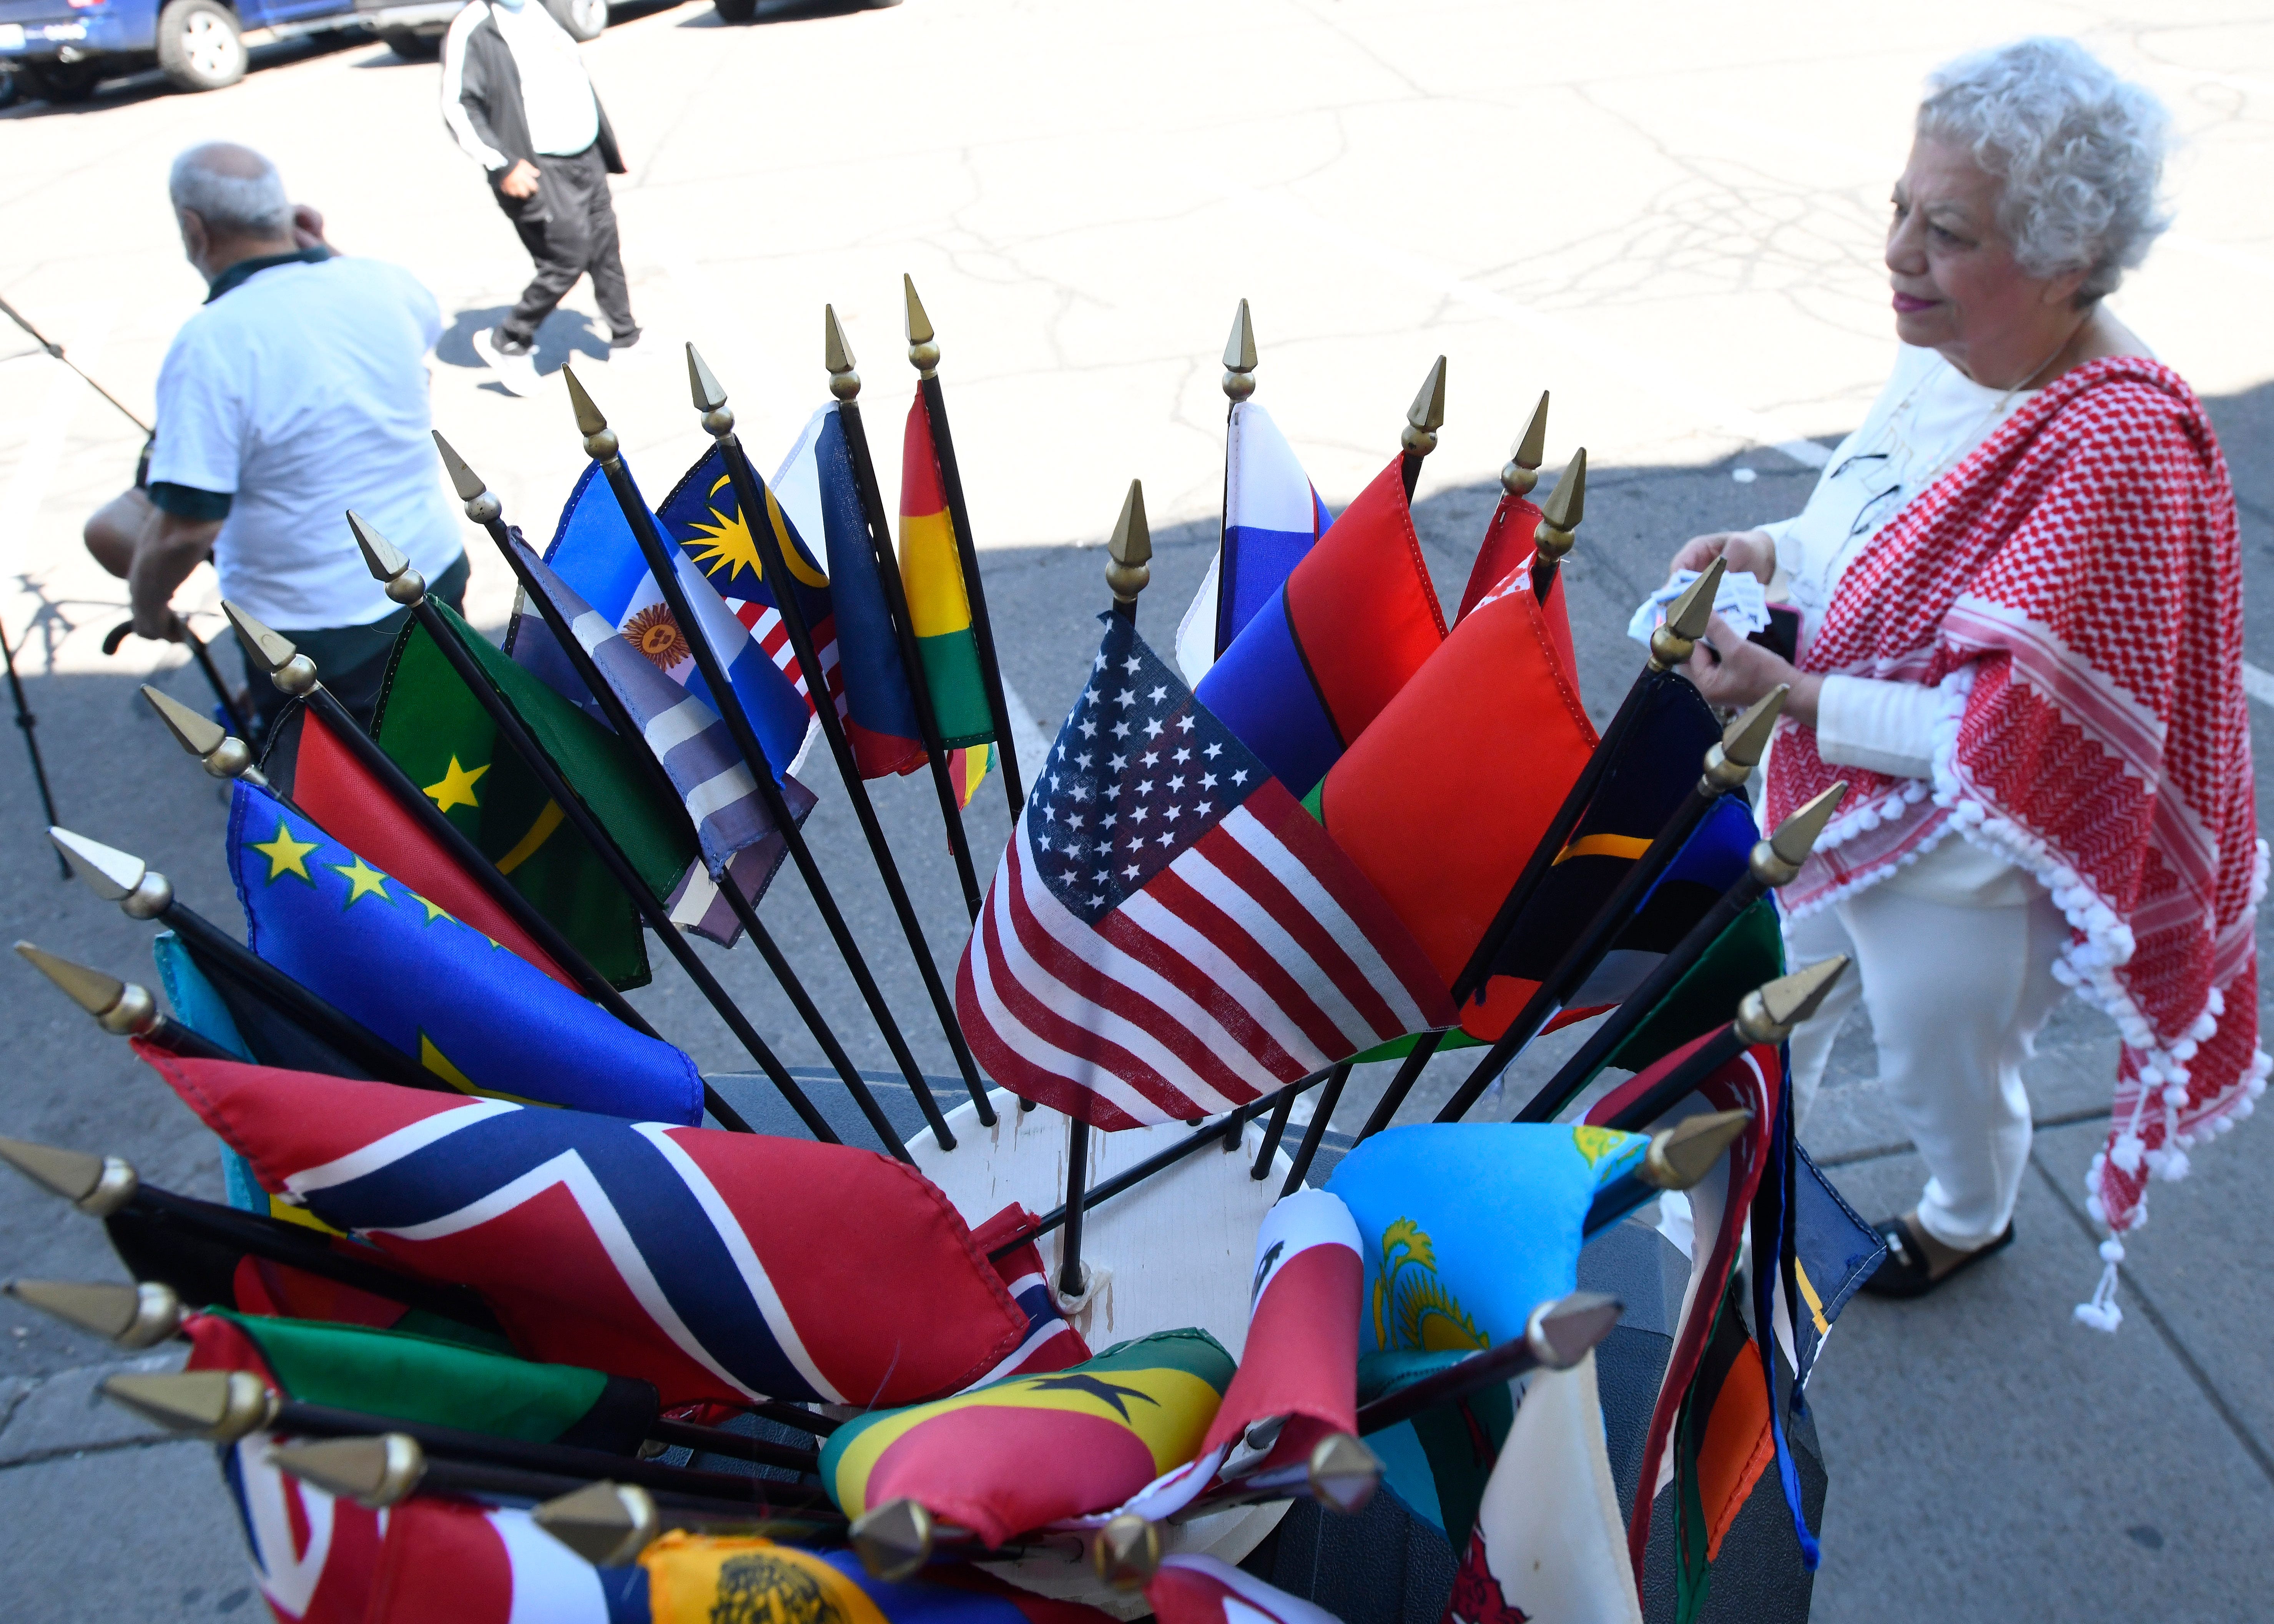 Nada Dalgamouni, global education director of the International Institute of Metropolitan Detroit, Inc. brings a bouquet of flags of countries to the news conference, "The flags represent to you, that the whole world is saying the same thing, enough is enough."